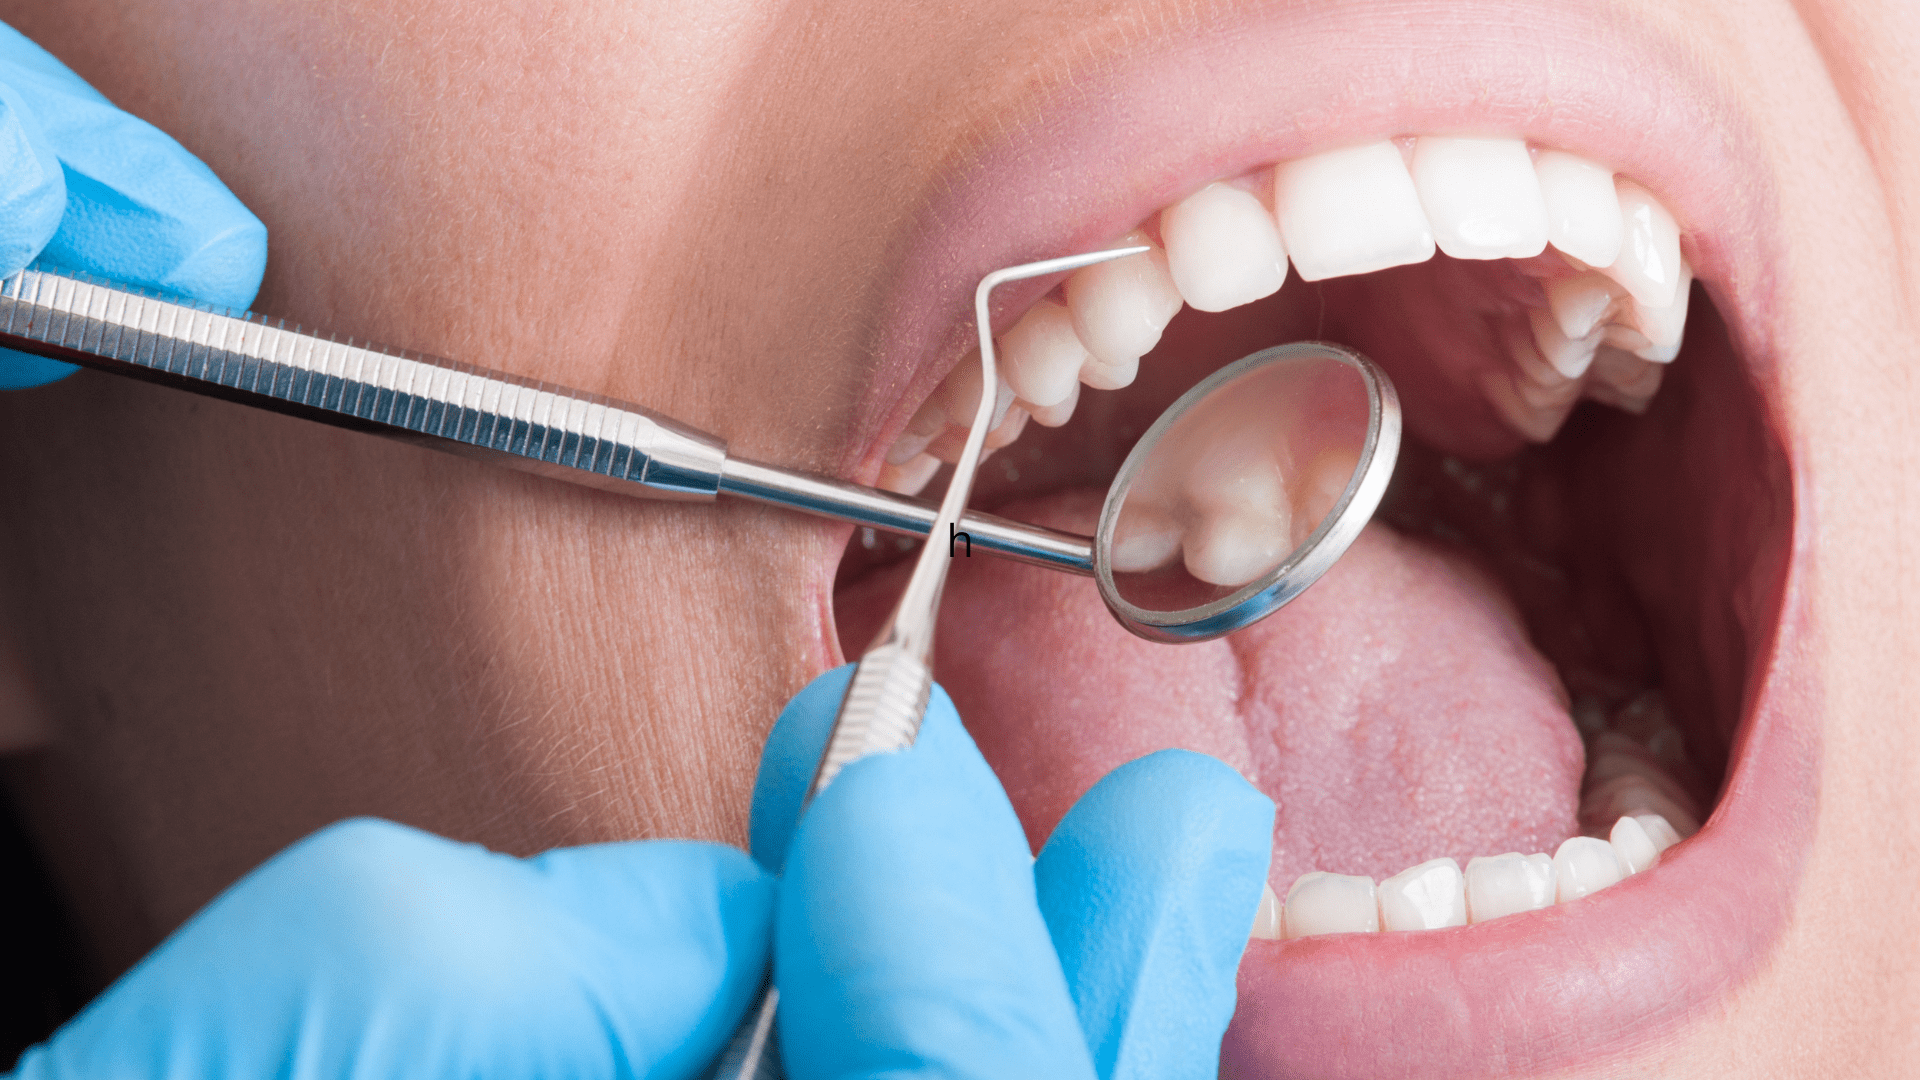 Murfreesboro dentist checking teeth after cleaning